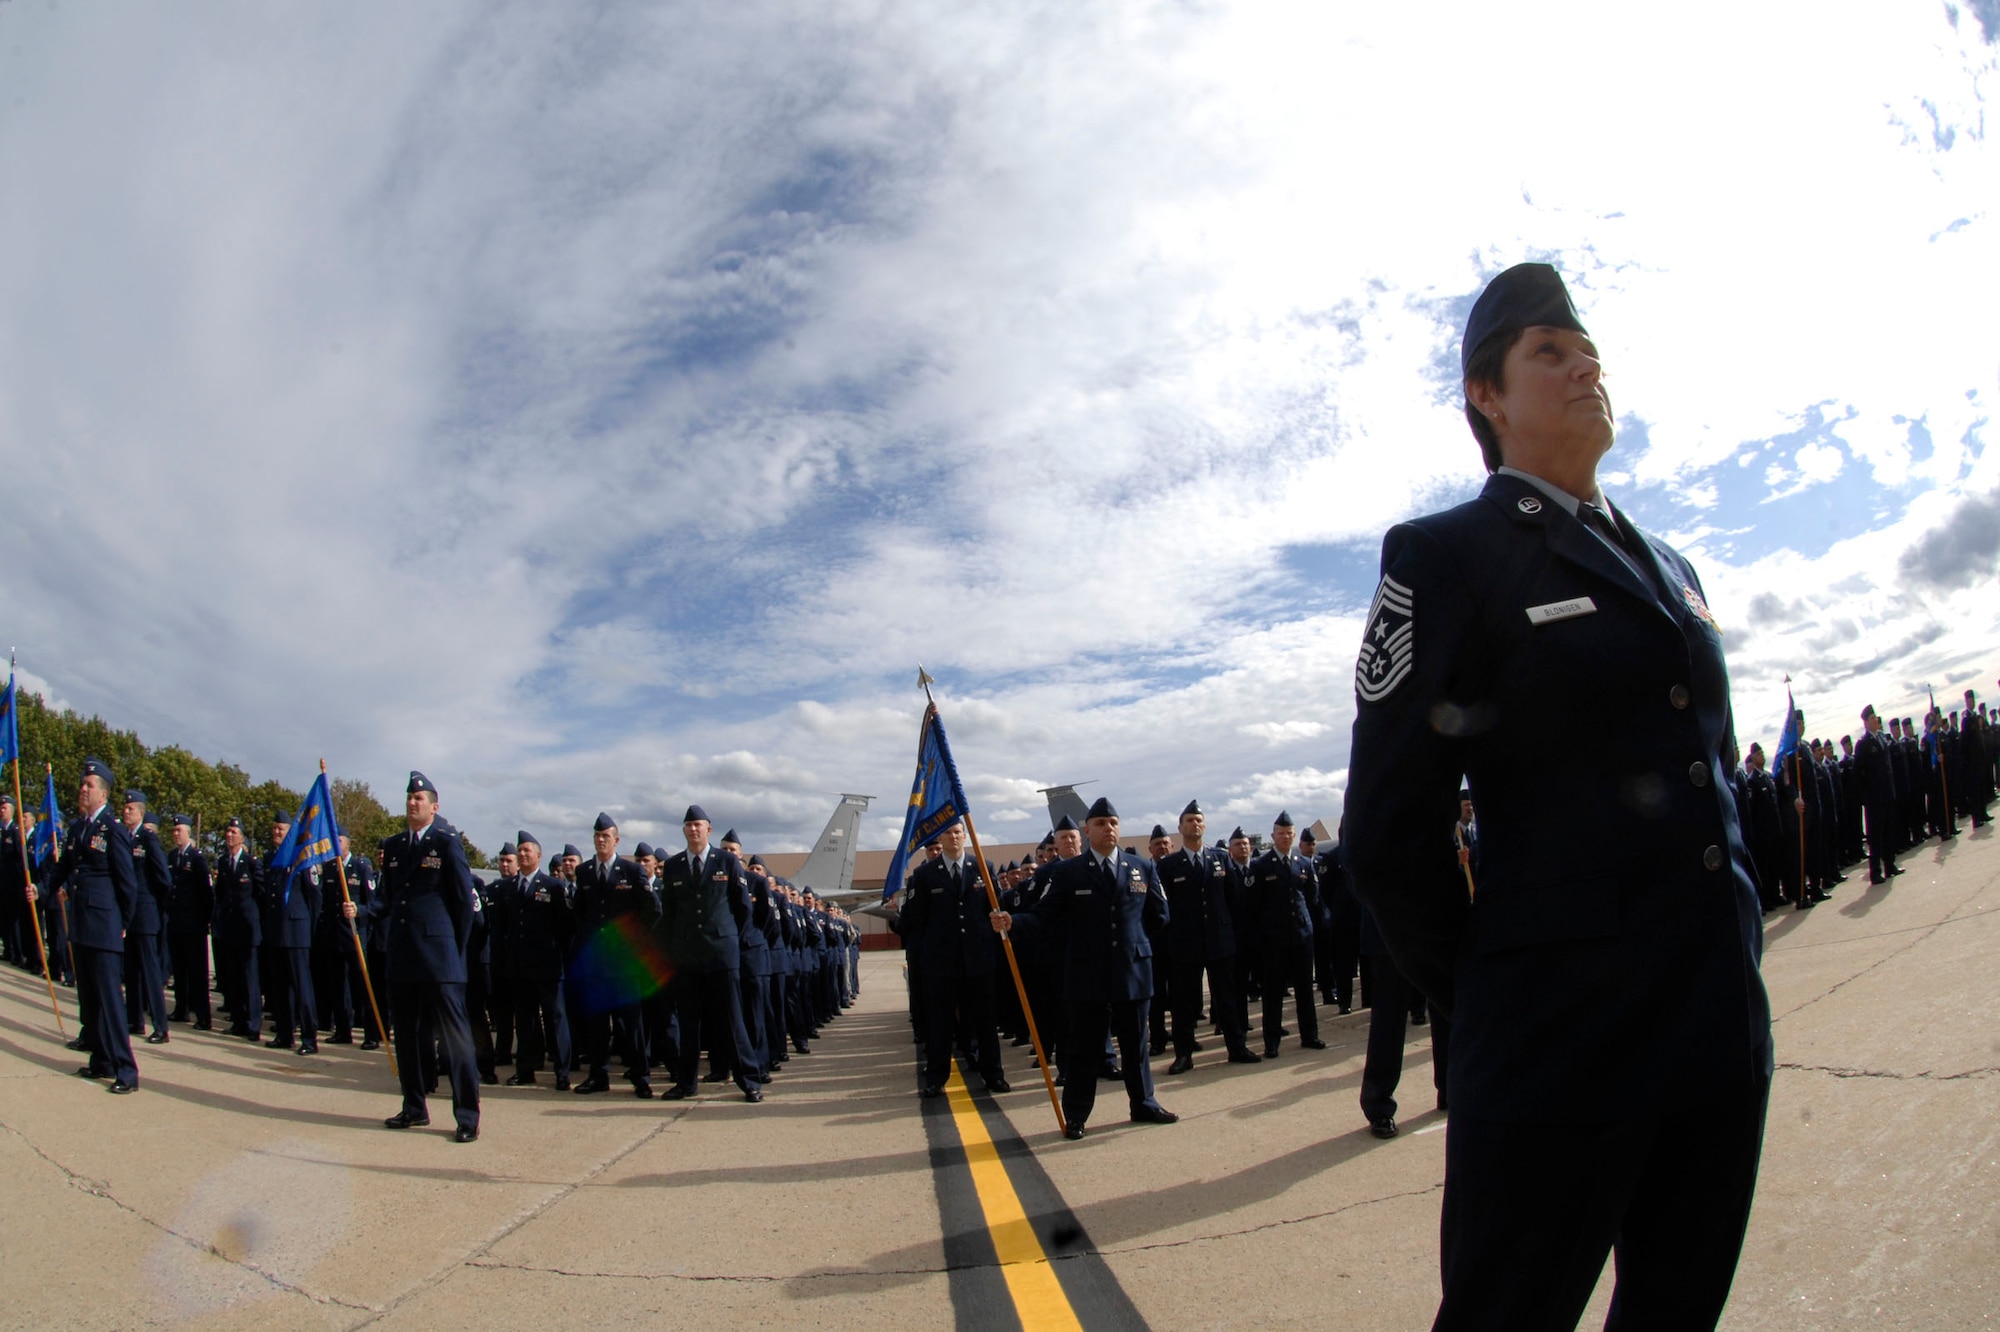 Members of the 64th Air Refueling Squadron stand at parade rest during their unit’s activation ceremony, Oct. 2, 2009, at Pease Air National Guard Base, N. H. The history of the 64th ARS dates back to 1942, when it was a troop carrier squadron. Between 1943 and 1952, the unit flew aerial transportation and evacuation missions. From 1953 to 1997, the squadron provided airlift services during the Vietnam War and to Operations Desert Storm and Desert Shield. It was inactivated in 1997 but re-designated as a refueling squadron in 2002. The squadron was again disbanded in 2008, until its reactivation at Pease. (U.S. Air Force photo by Staff Sgt. Amanda Currier)